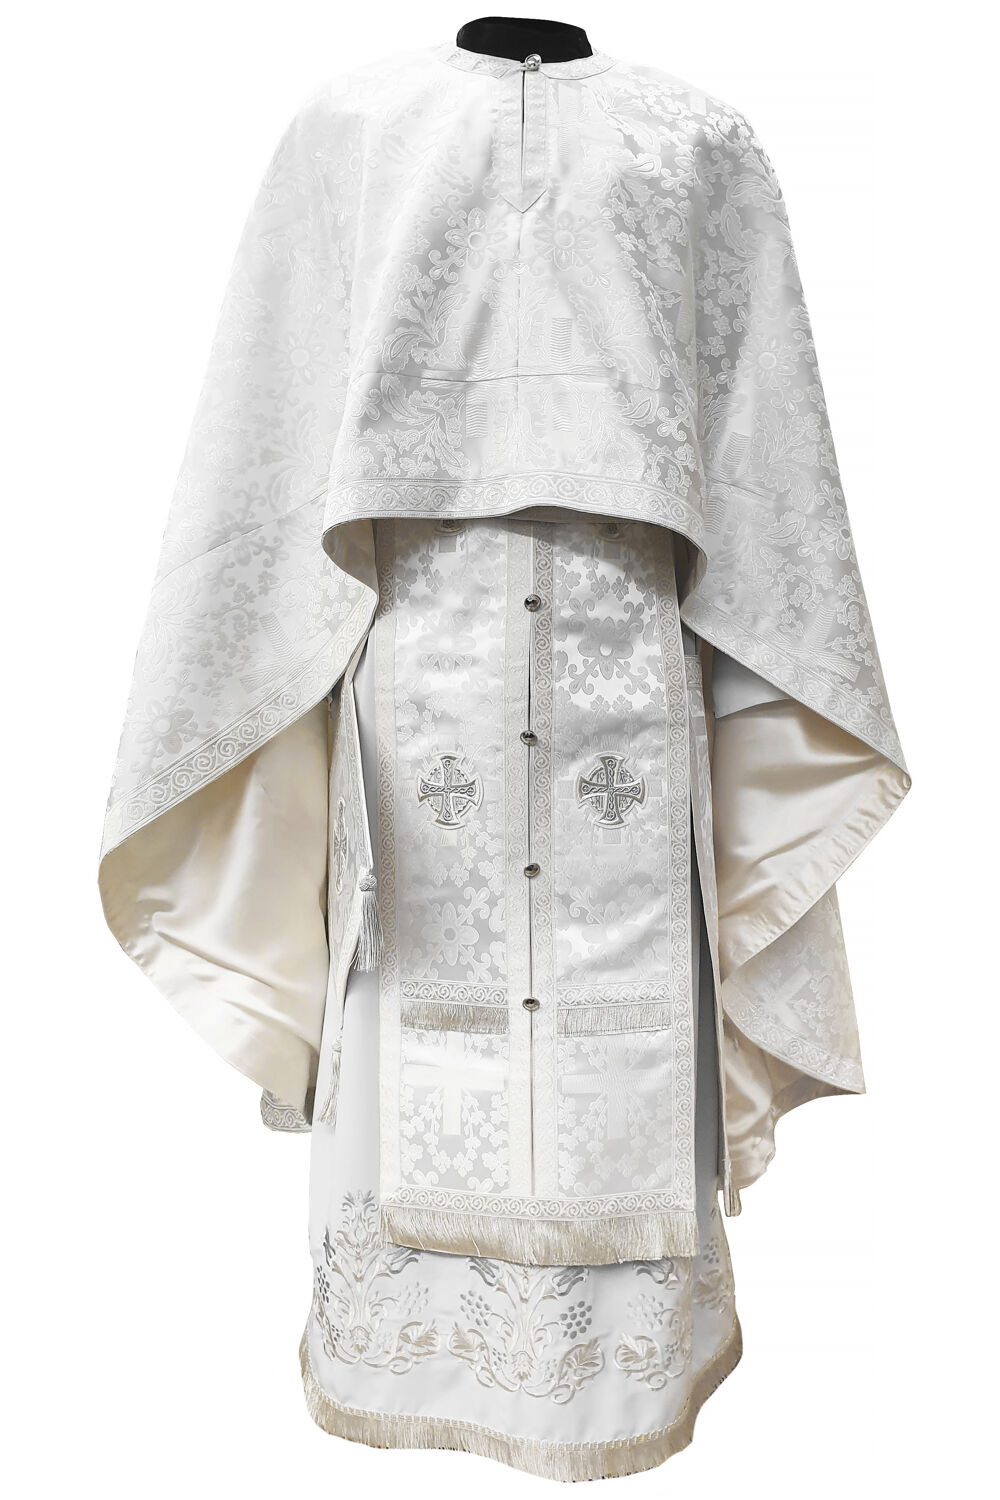 Vestment of Priest Greek Style white